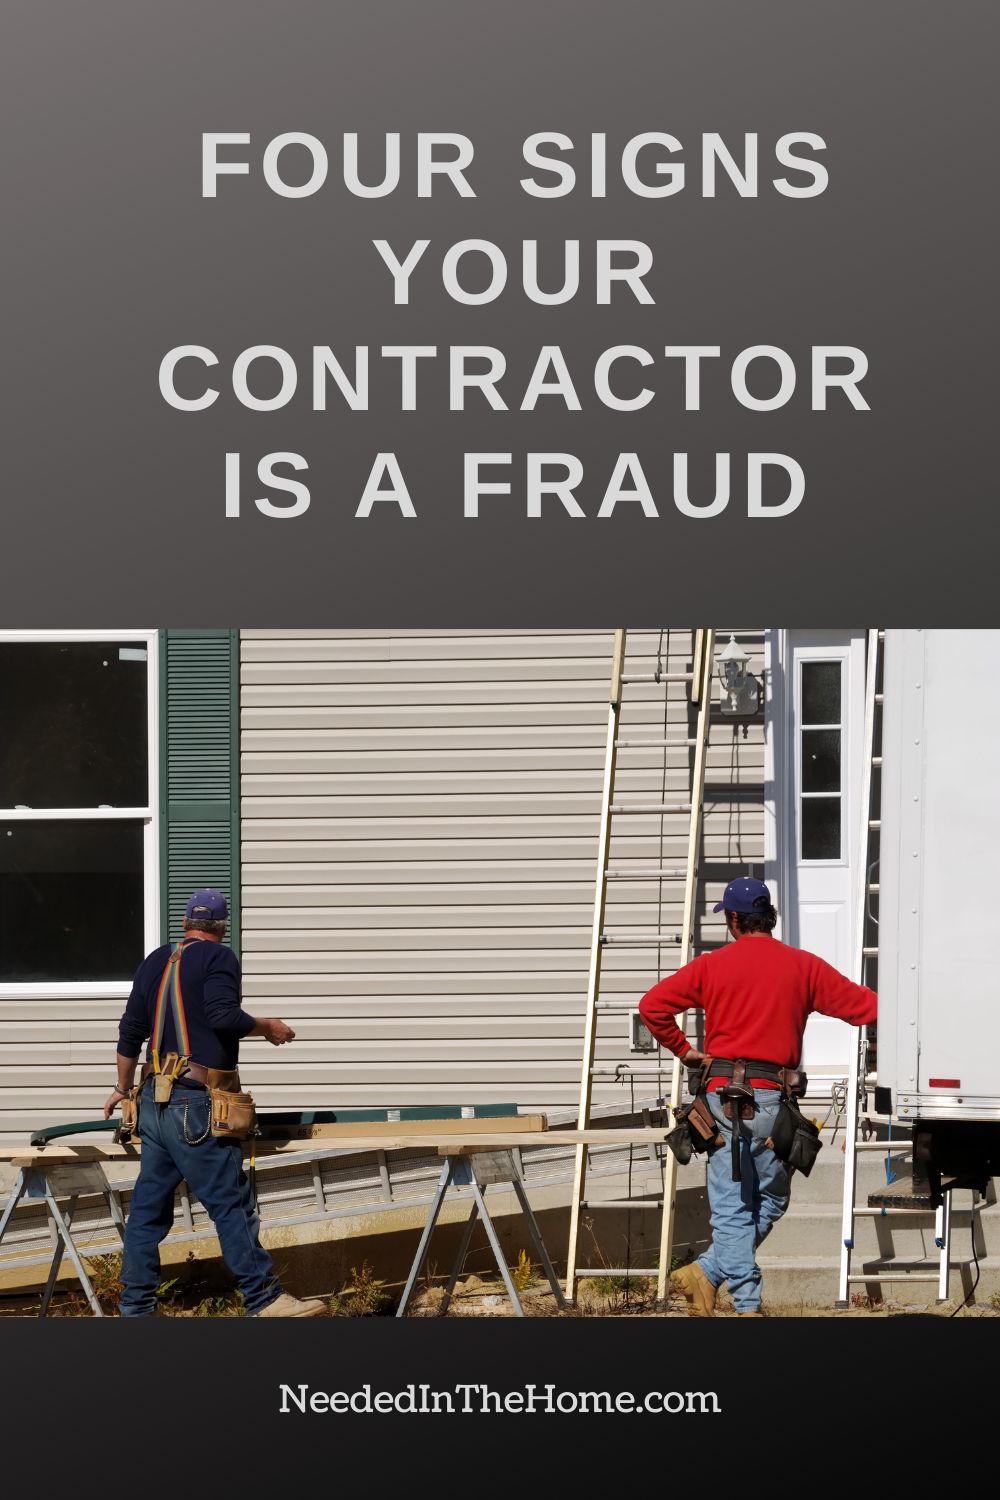 pinterest-pin-description four signs your contractor is a fraud two men on work site front of home ladders power tools neededinthehome